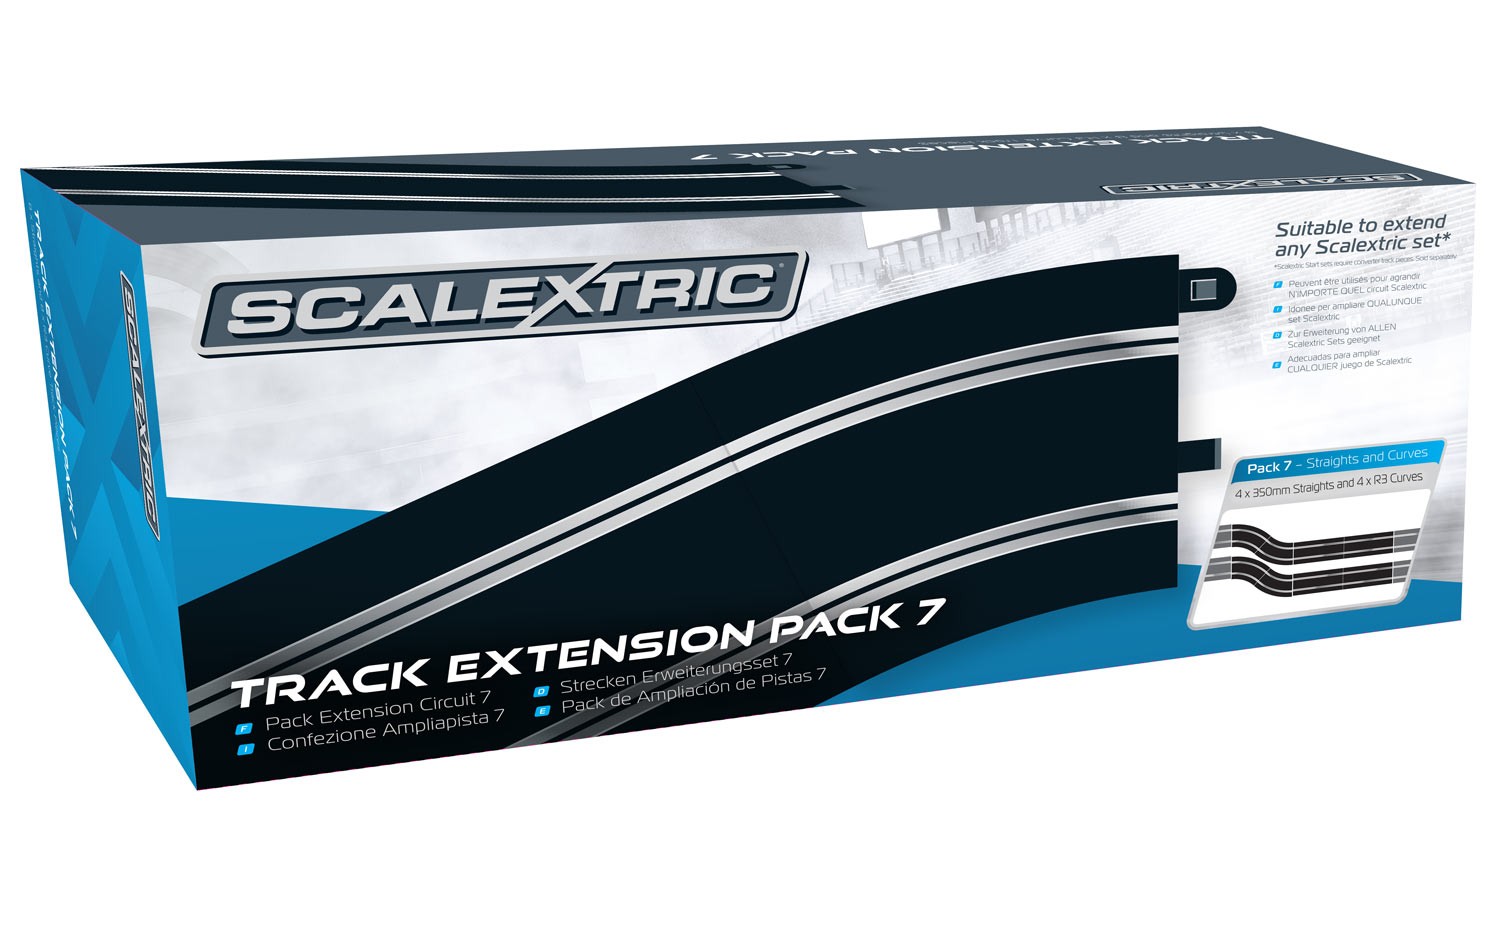 Track Extension Pack 7 